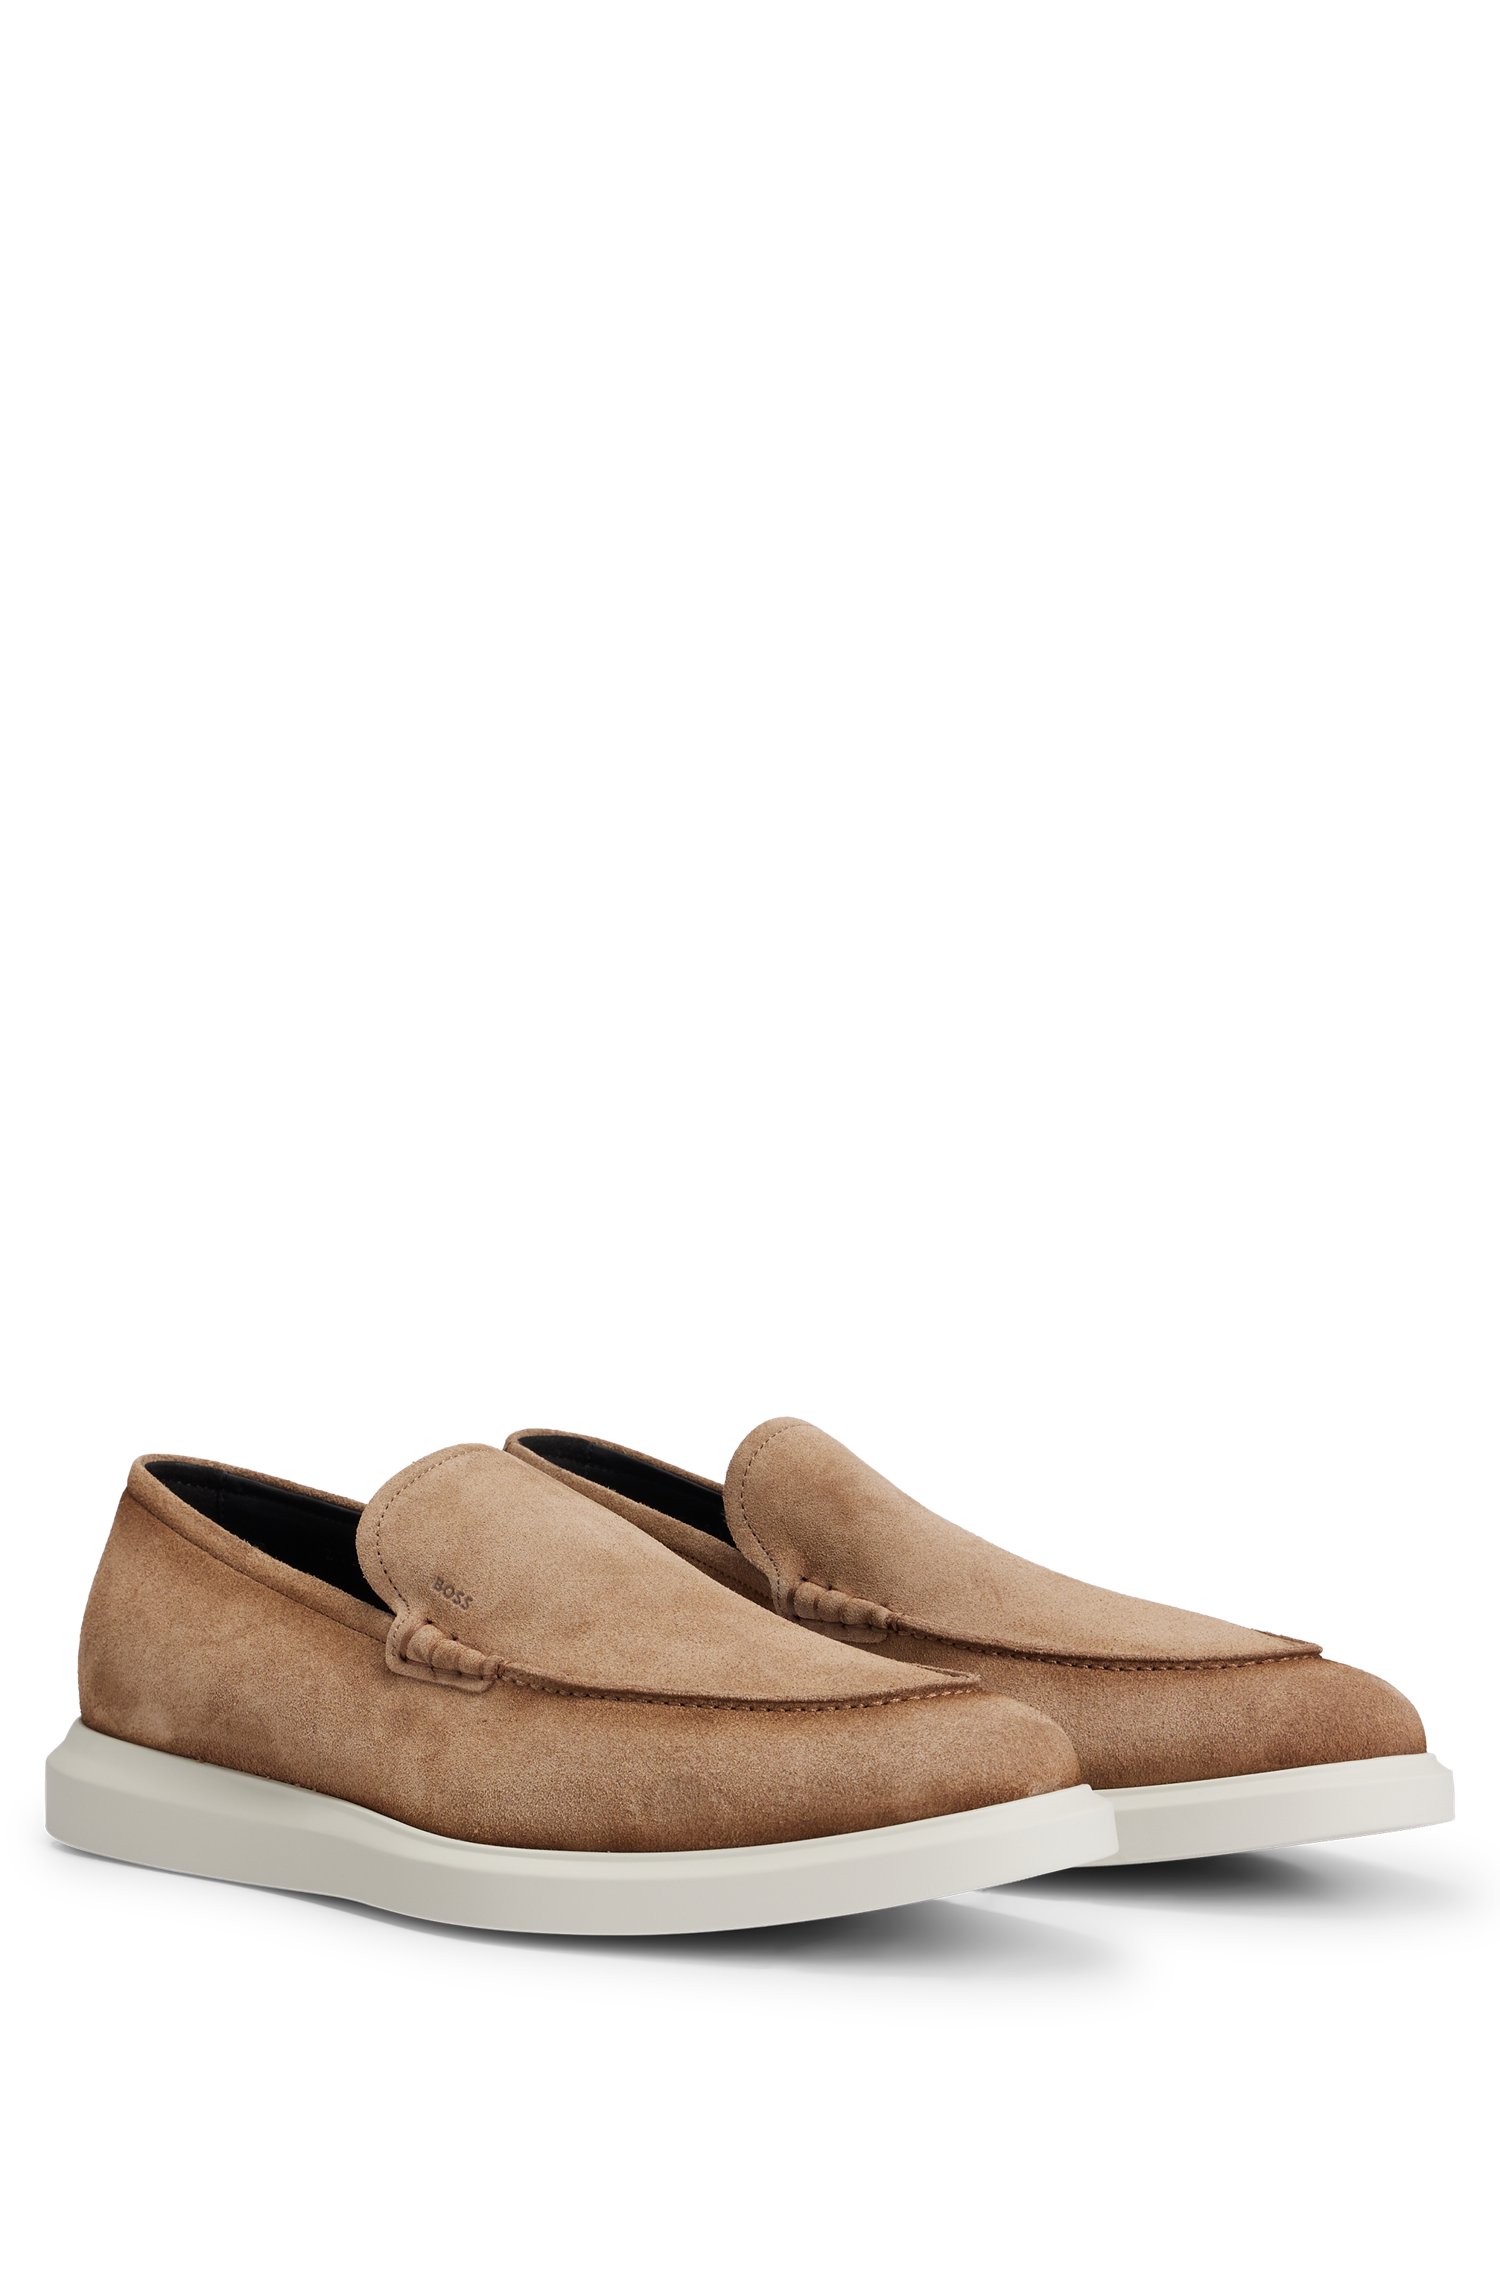 Suede loafers with lightweight outsole